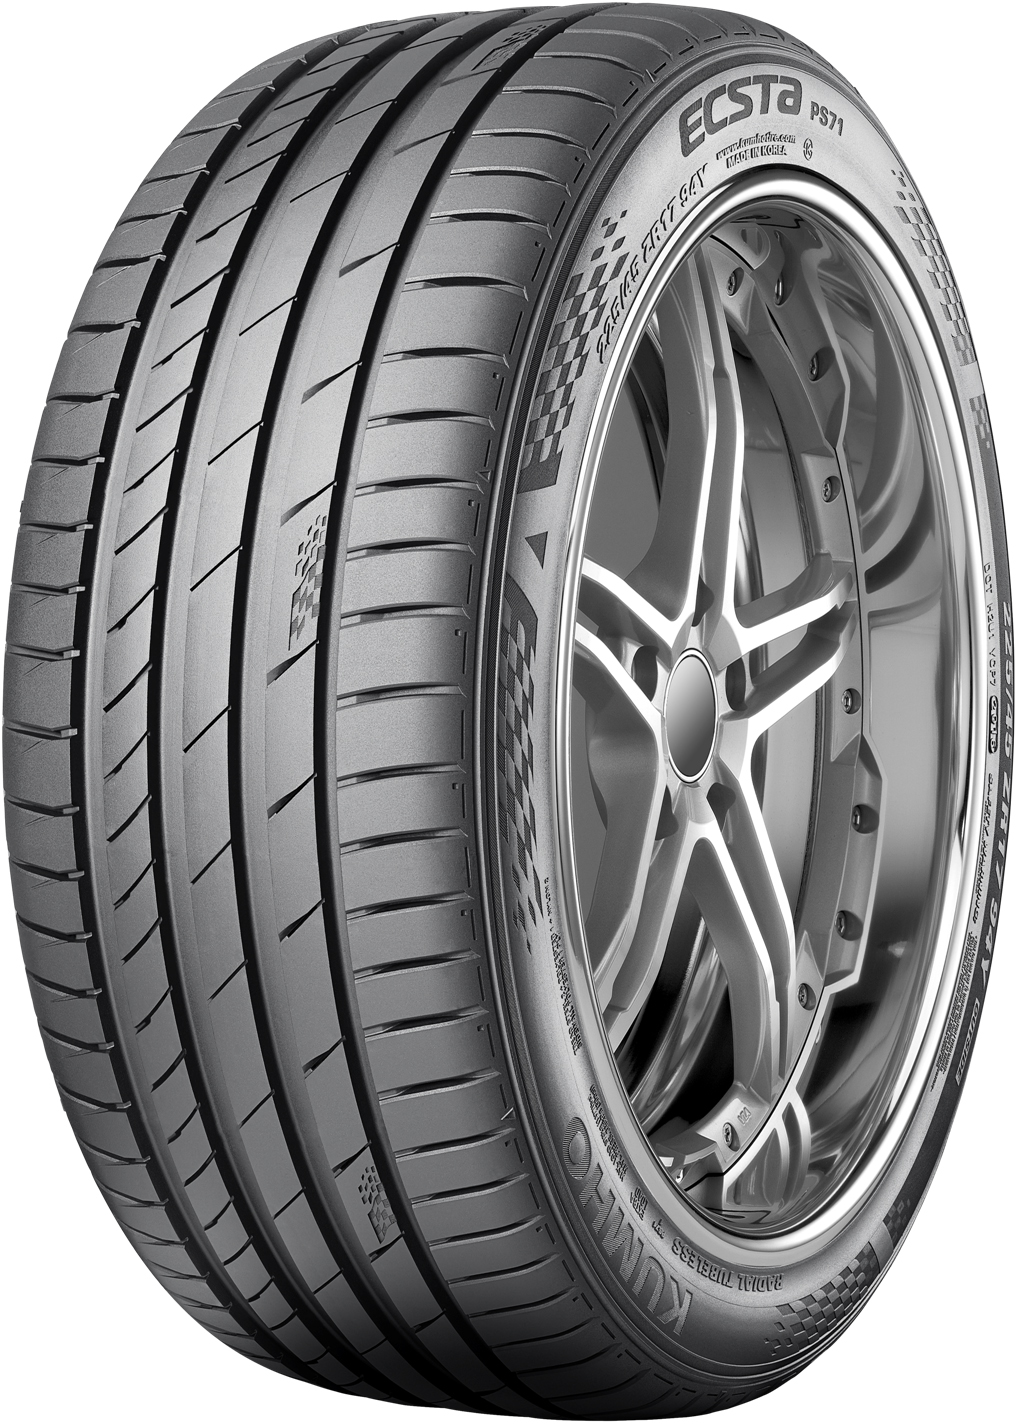 Anvelope auto KUMHO PS71 XL XL DOT 2021 265/35 R18 97Y